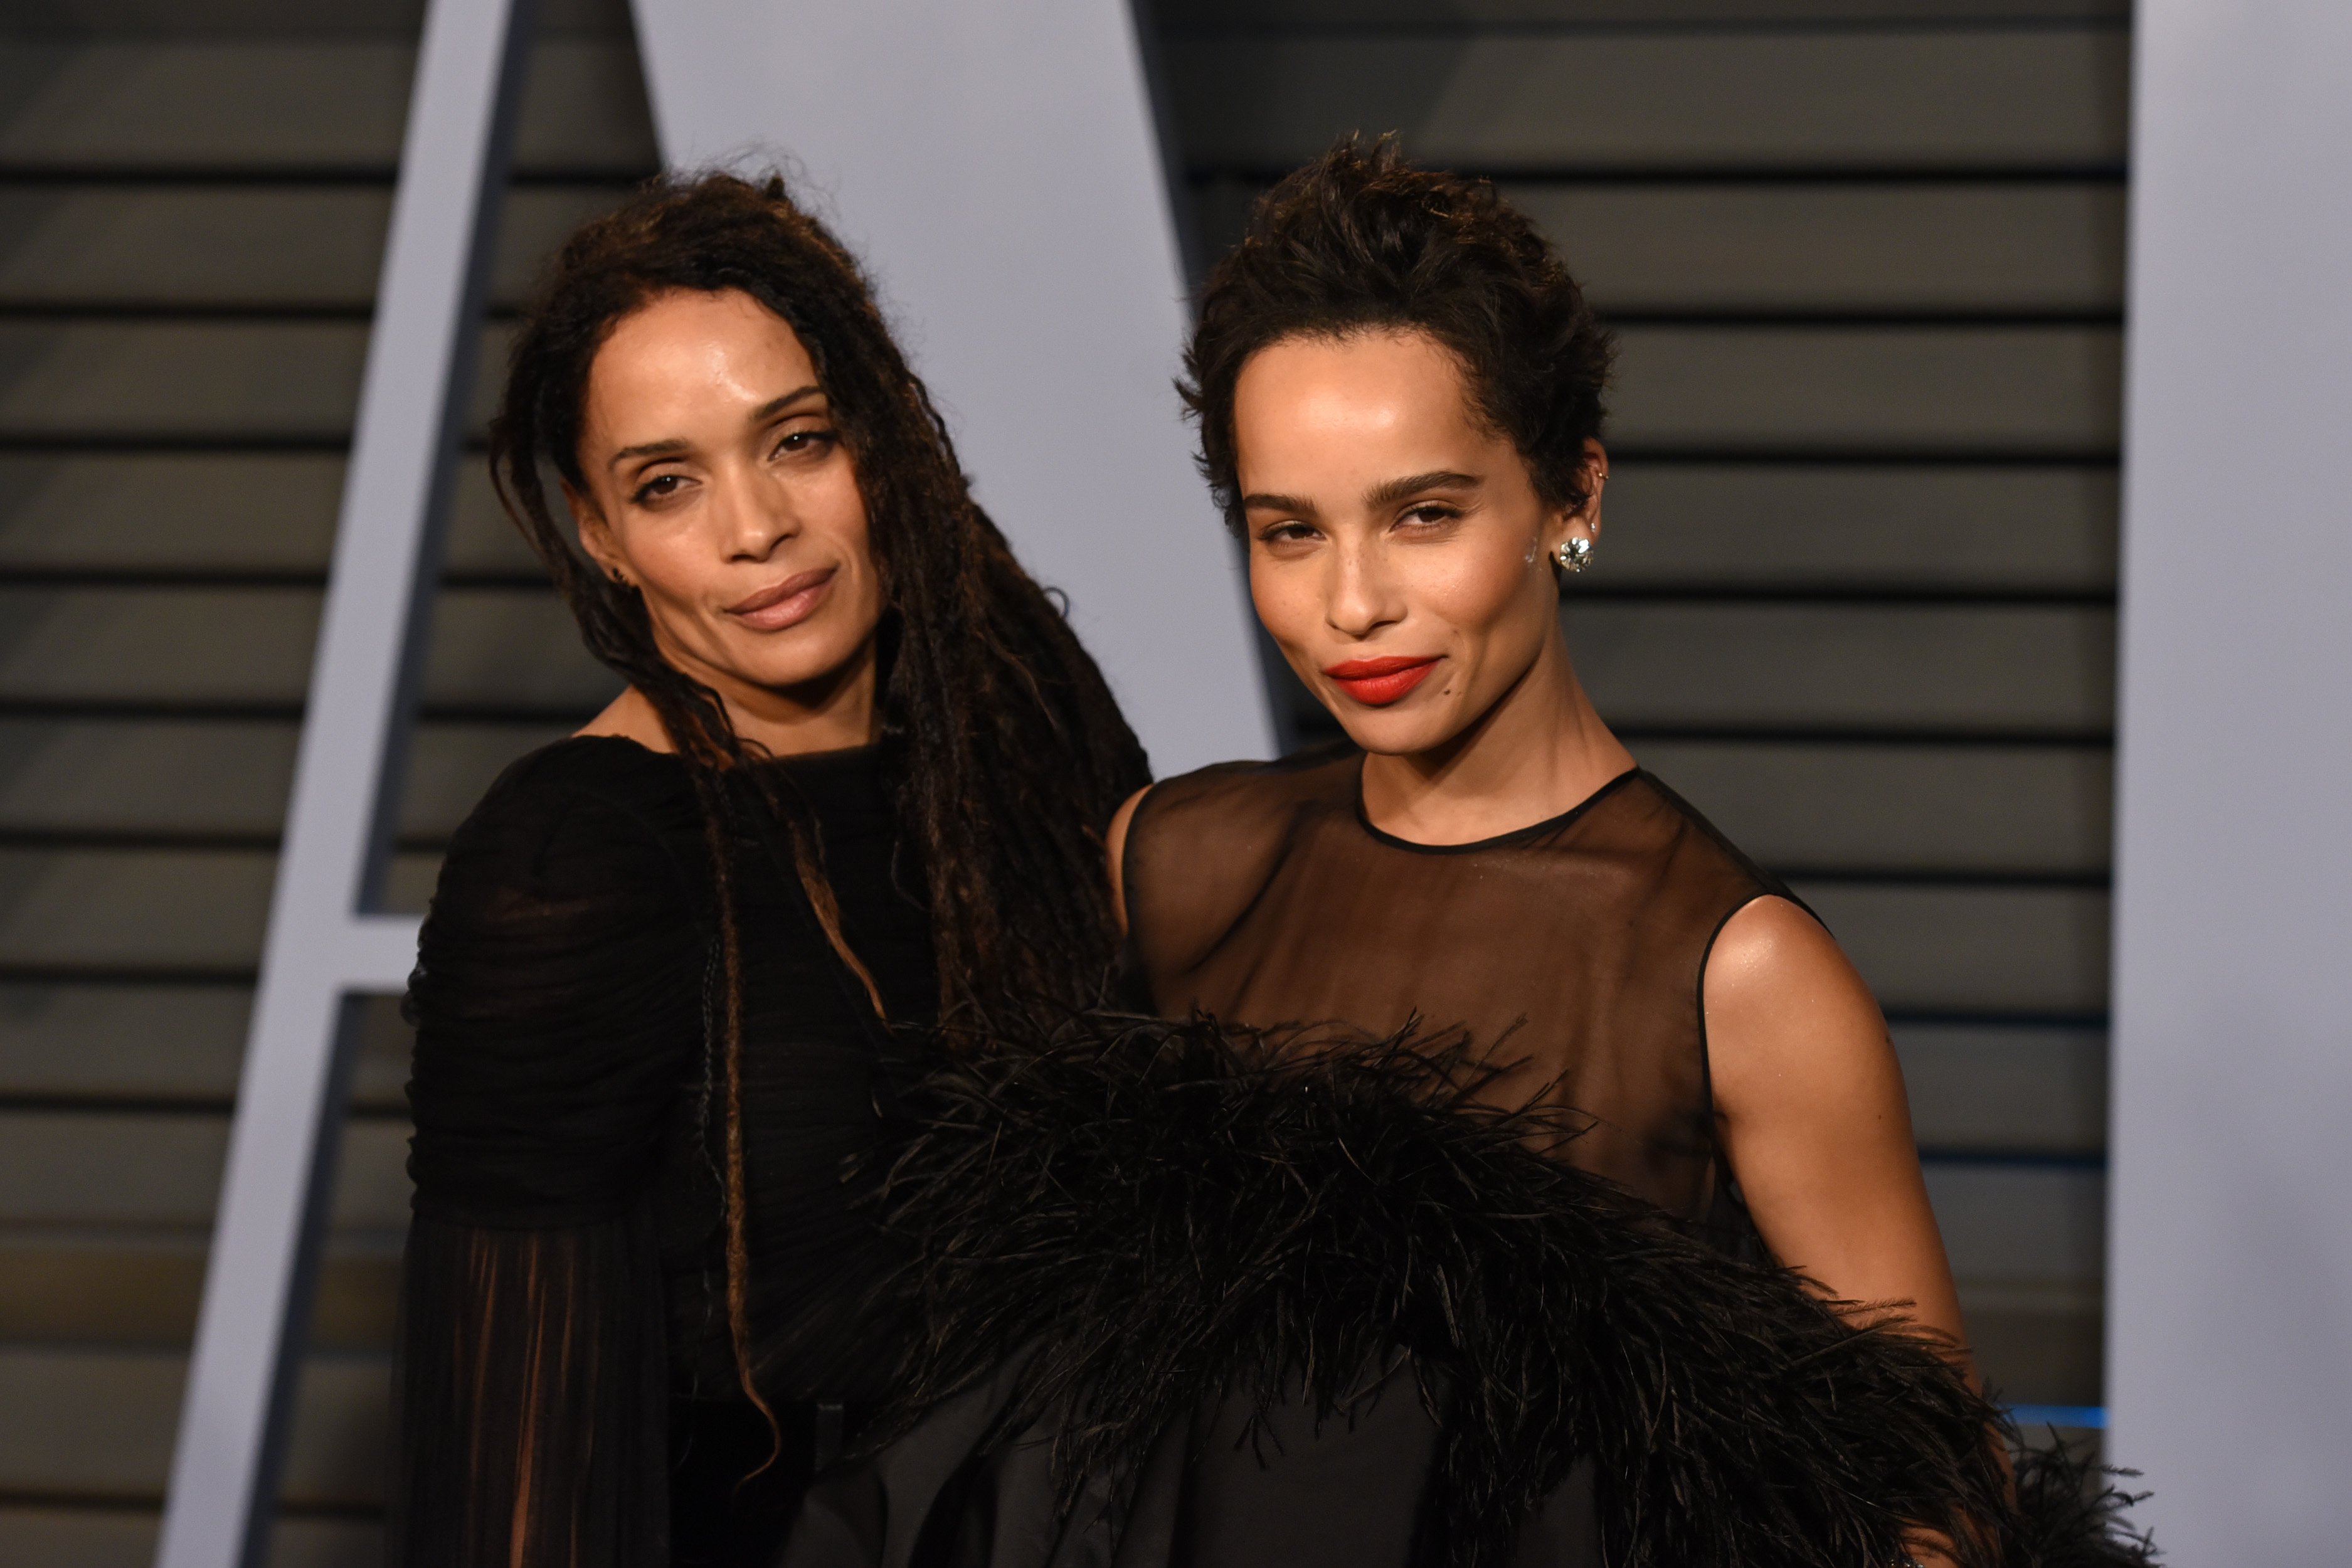 Actress and activist Lisa Bonet with daughter Zoe Kravitz. | Photo: Getty Images